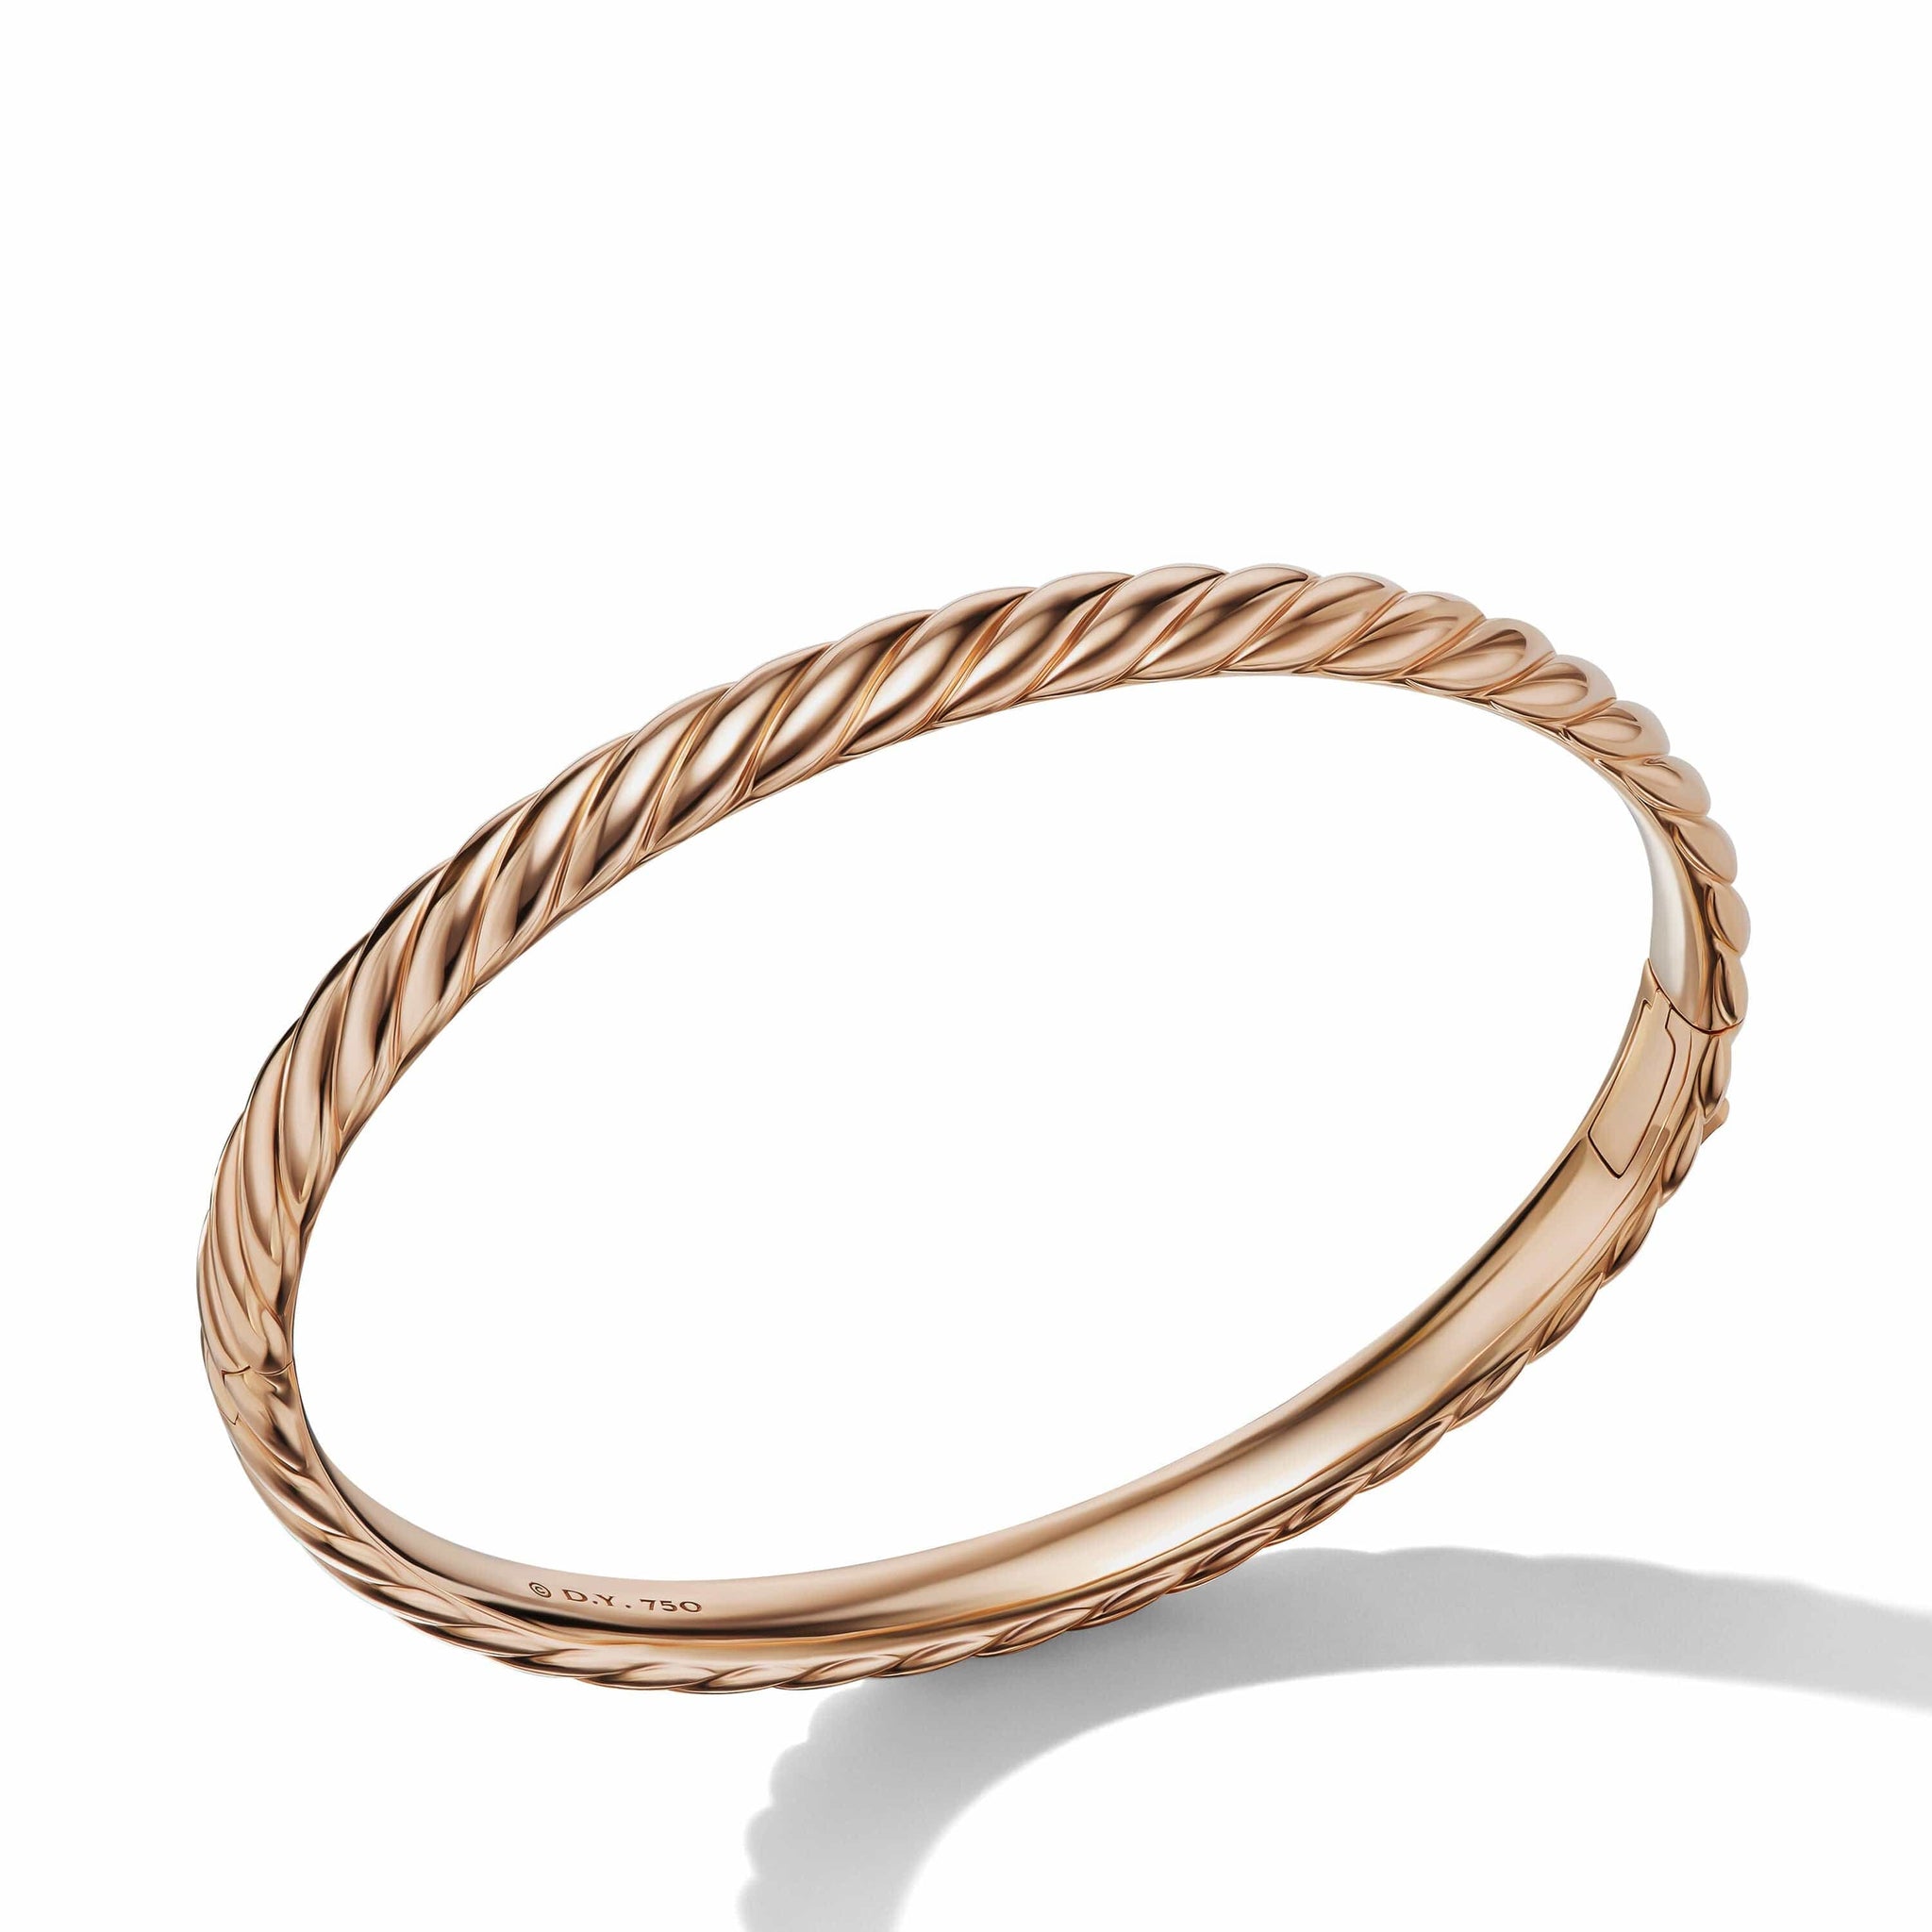 Sculpted Cable Band Ring in 18K Yellow Gold with Diamonds